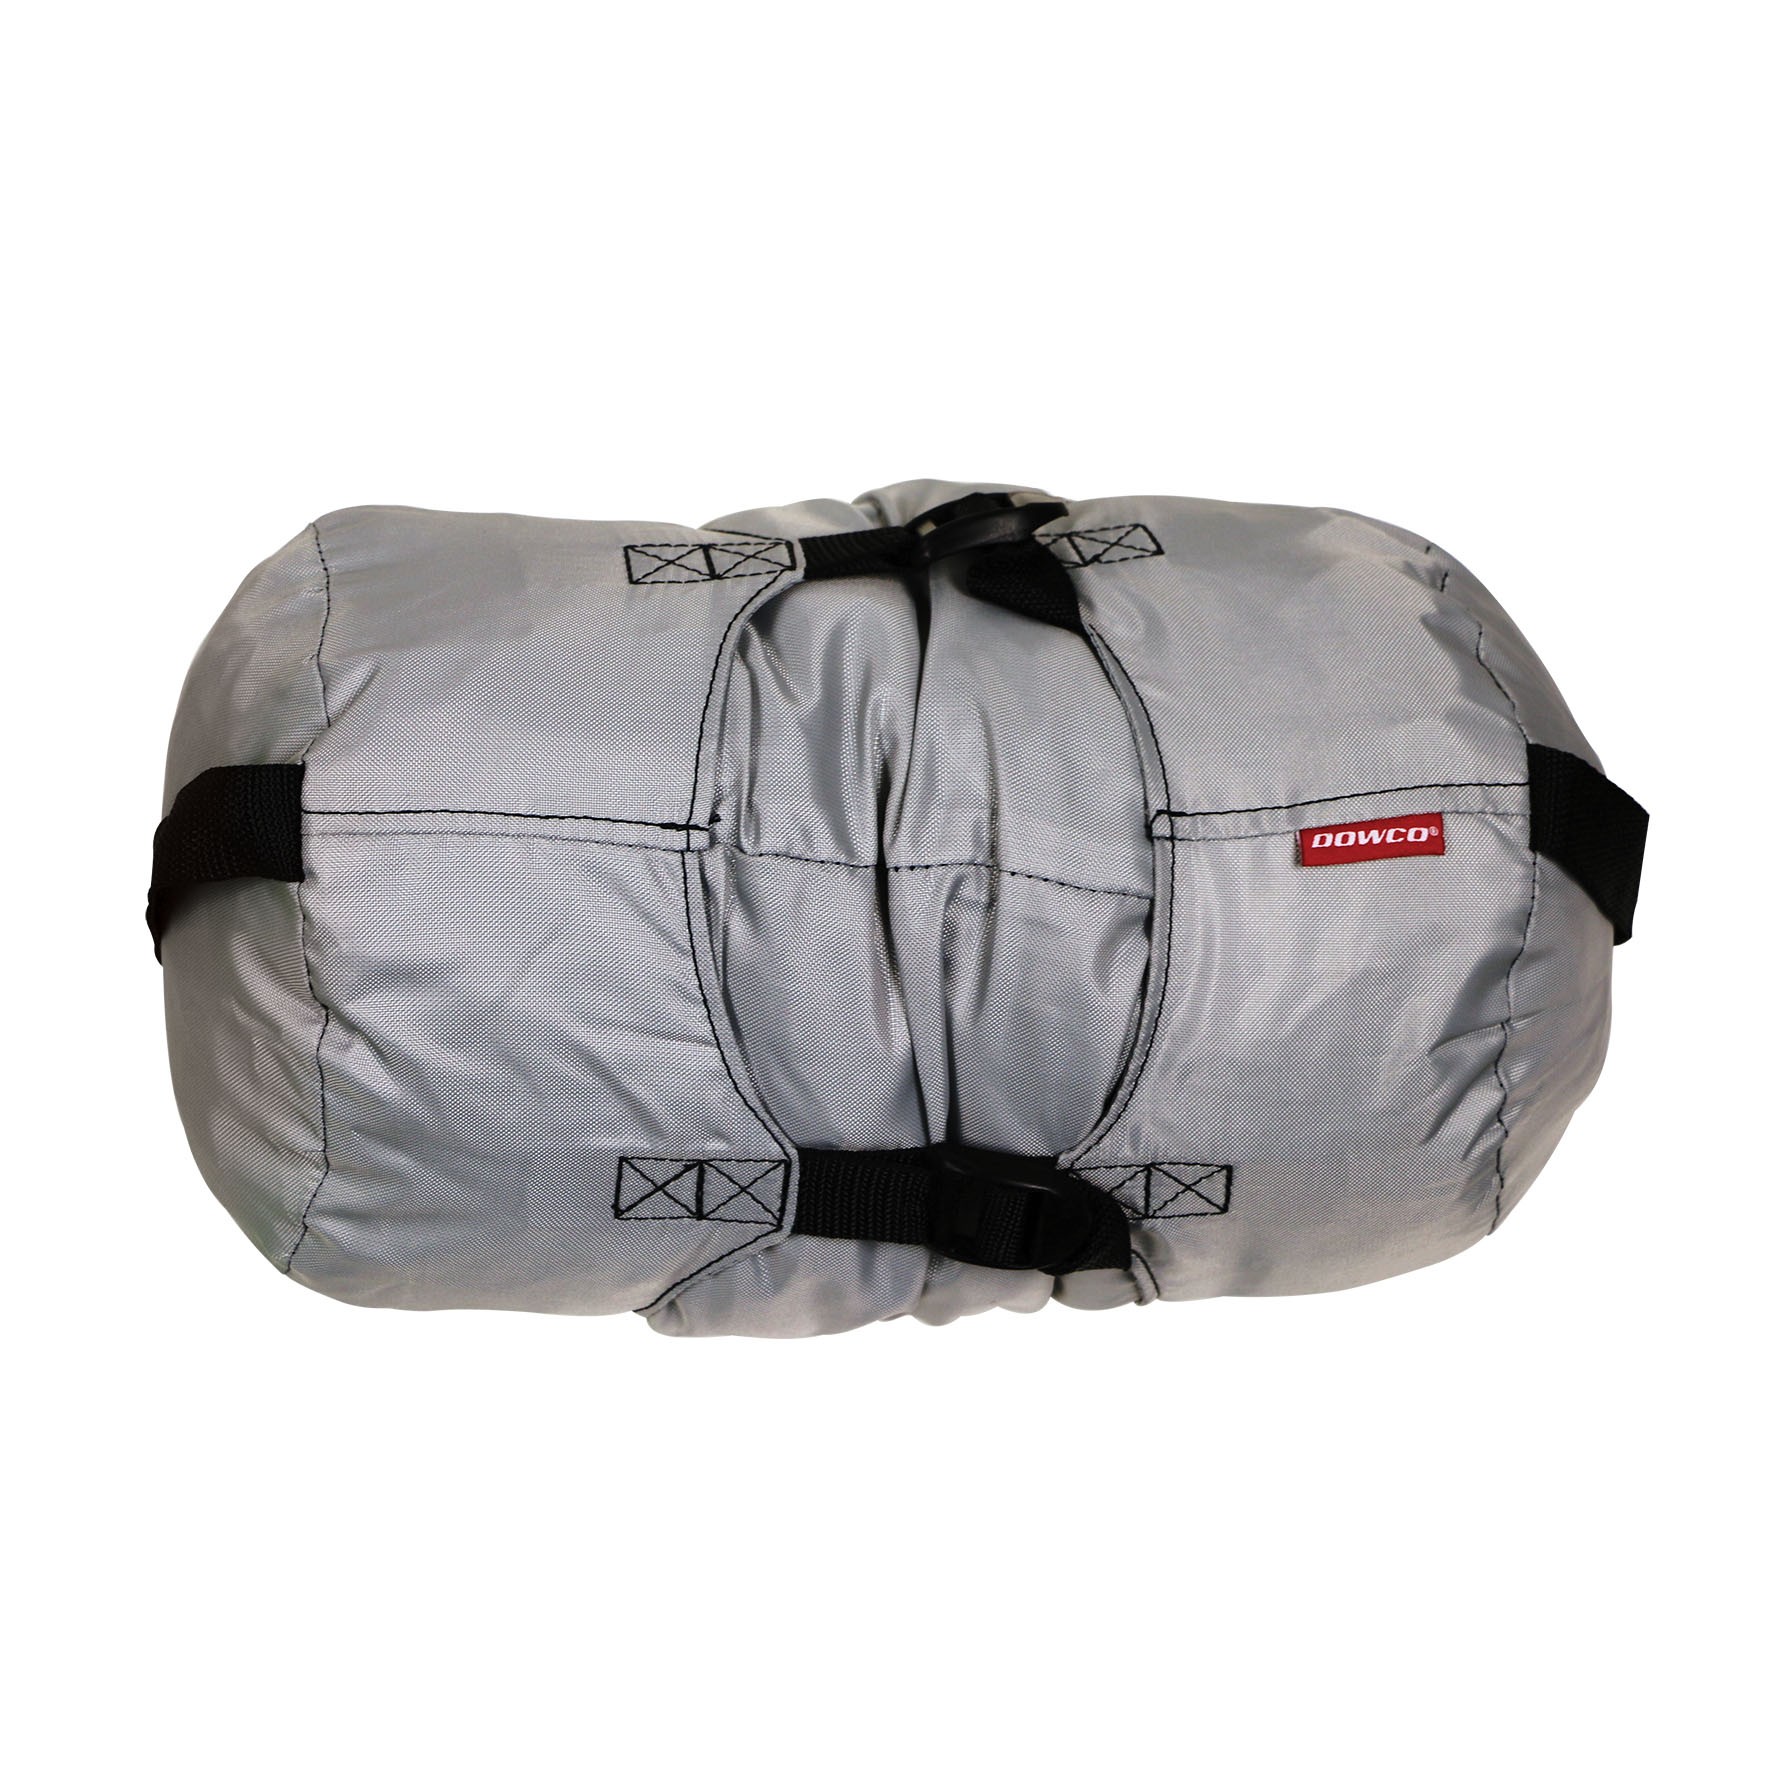 Dowco WeatherAll Plus Motorcycle Cover - Gray